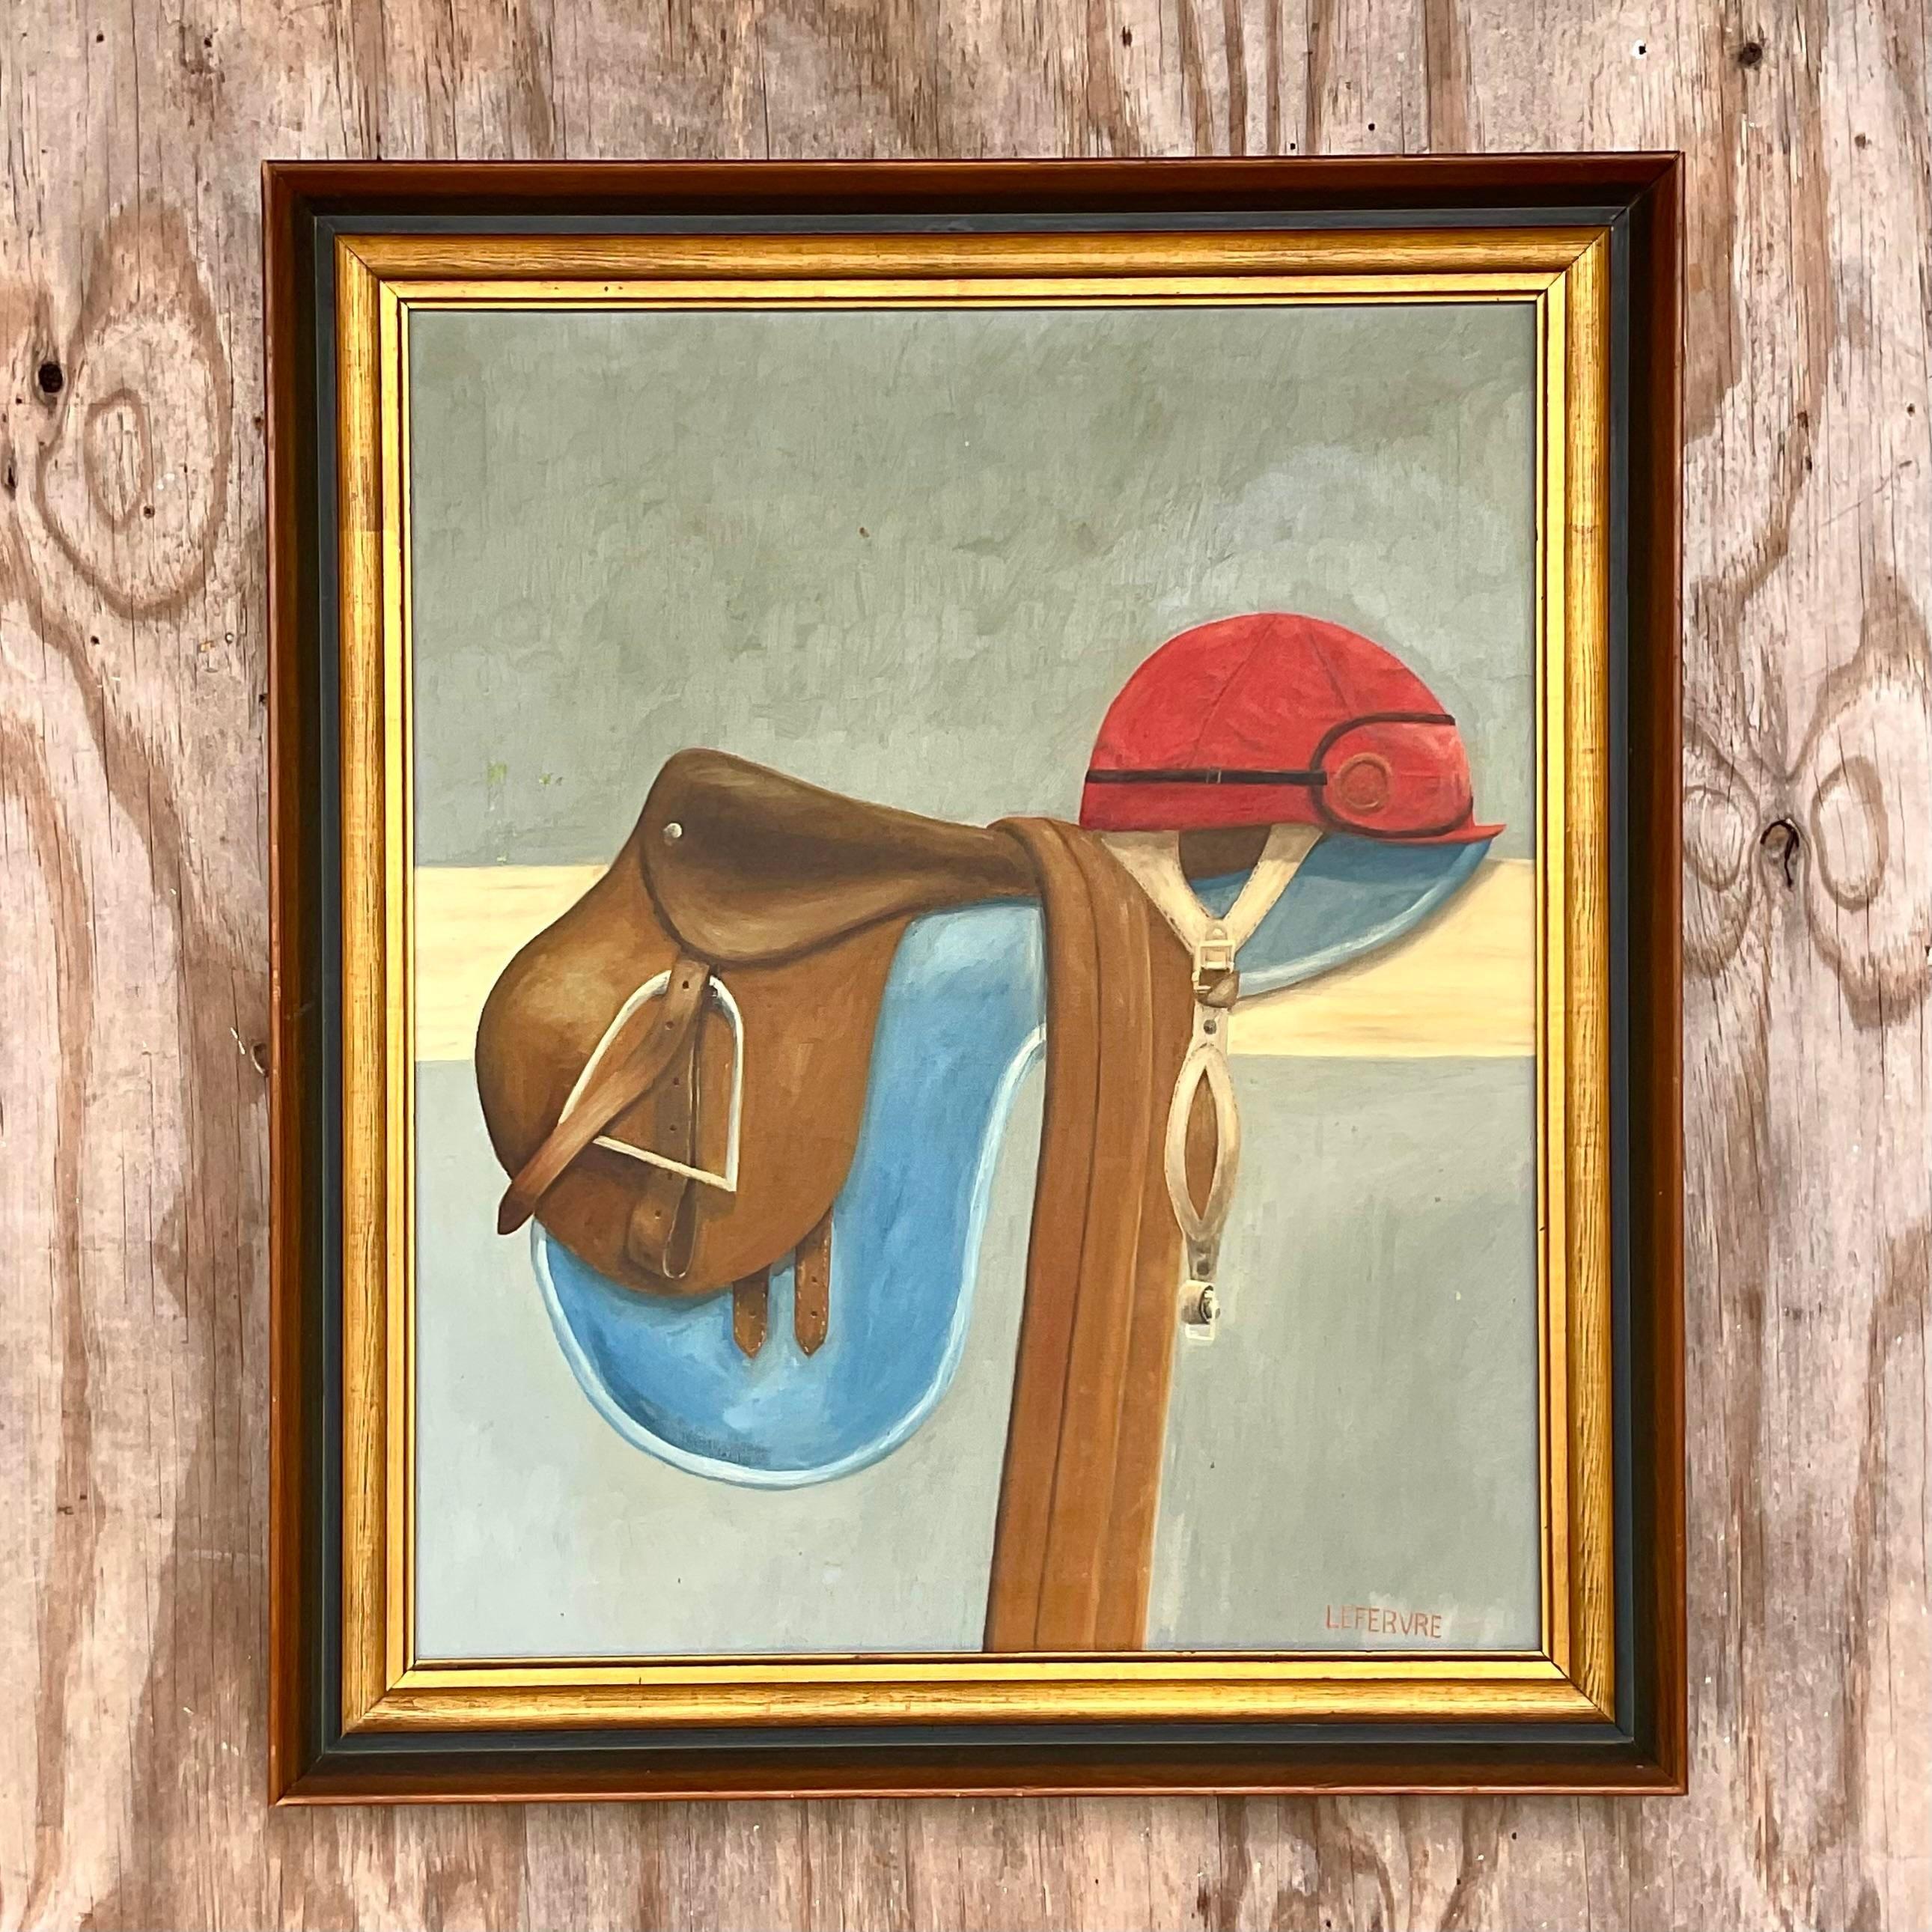 Vintage Boho Riding Gear Signed Original Oil Painting on Canvas 3